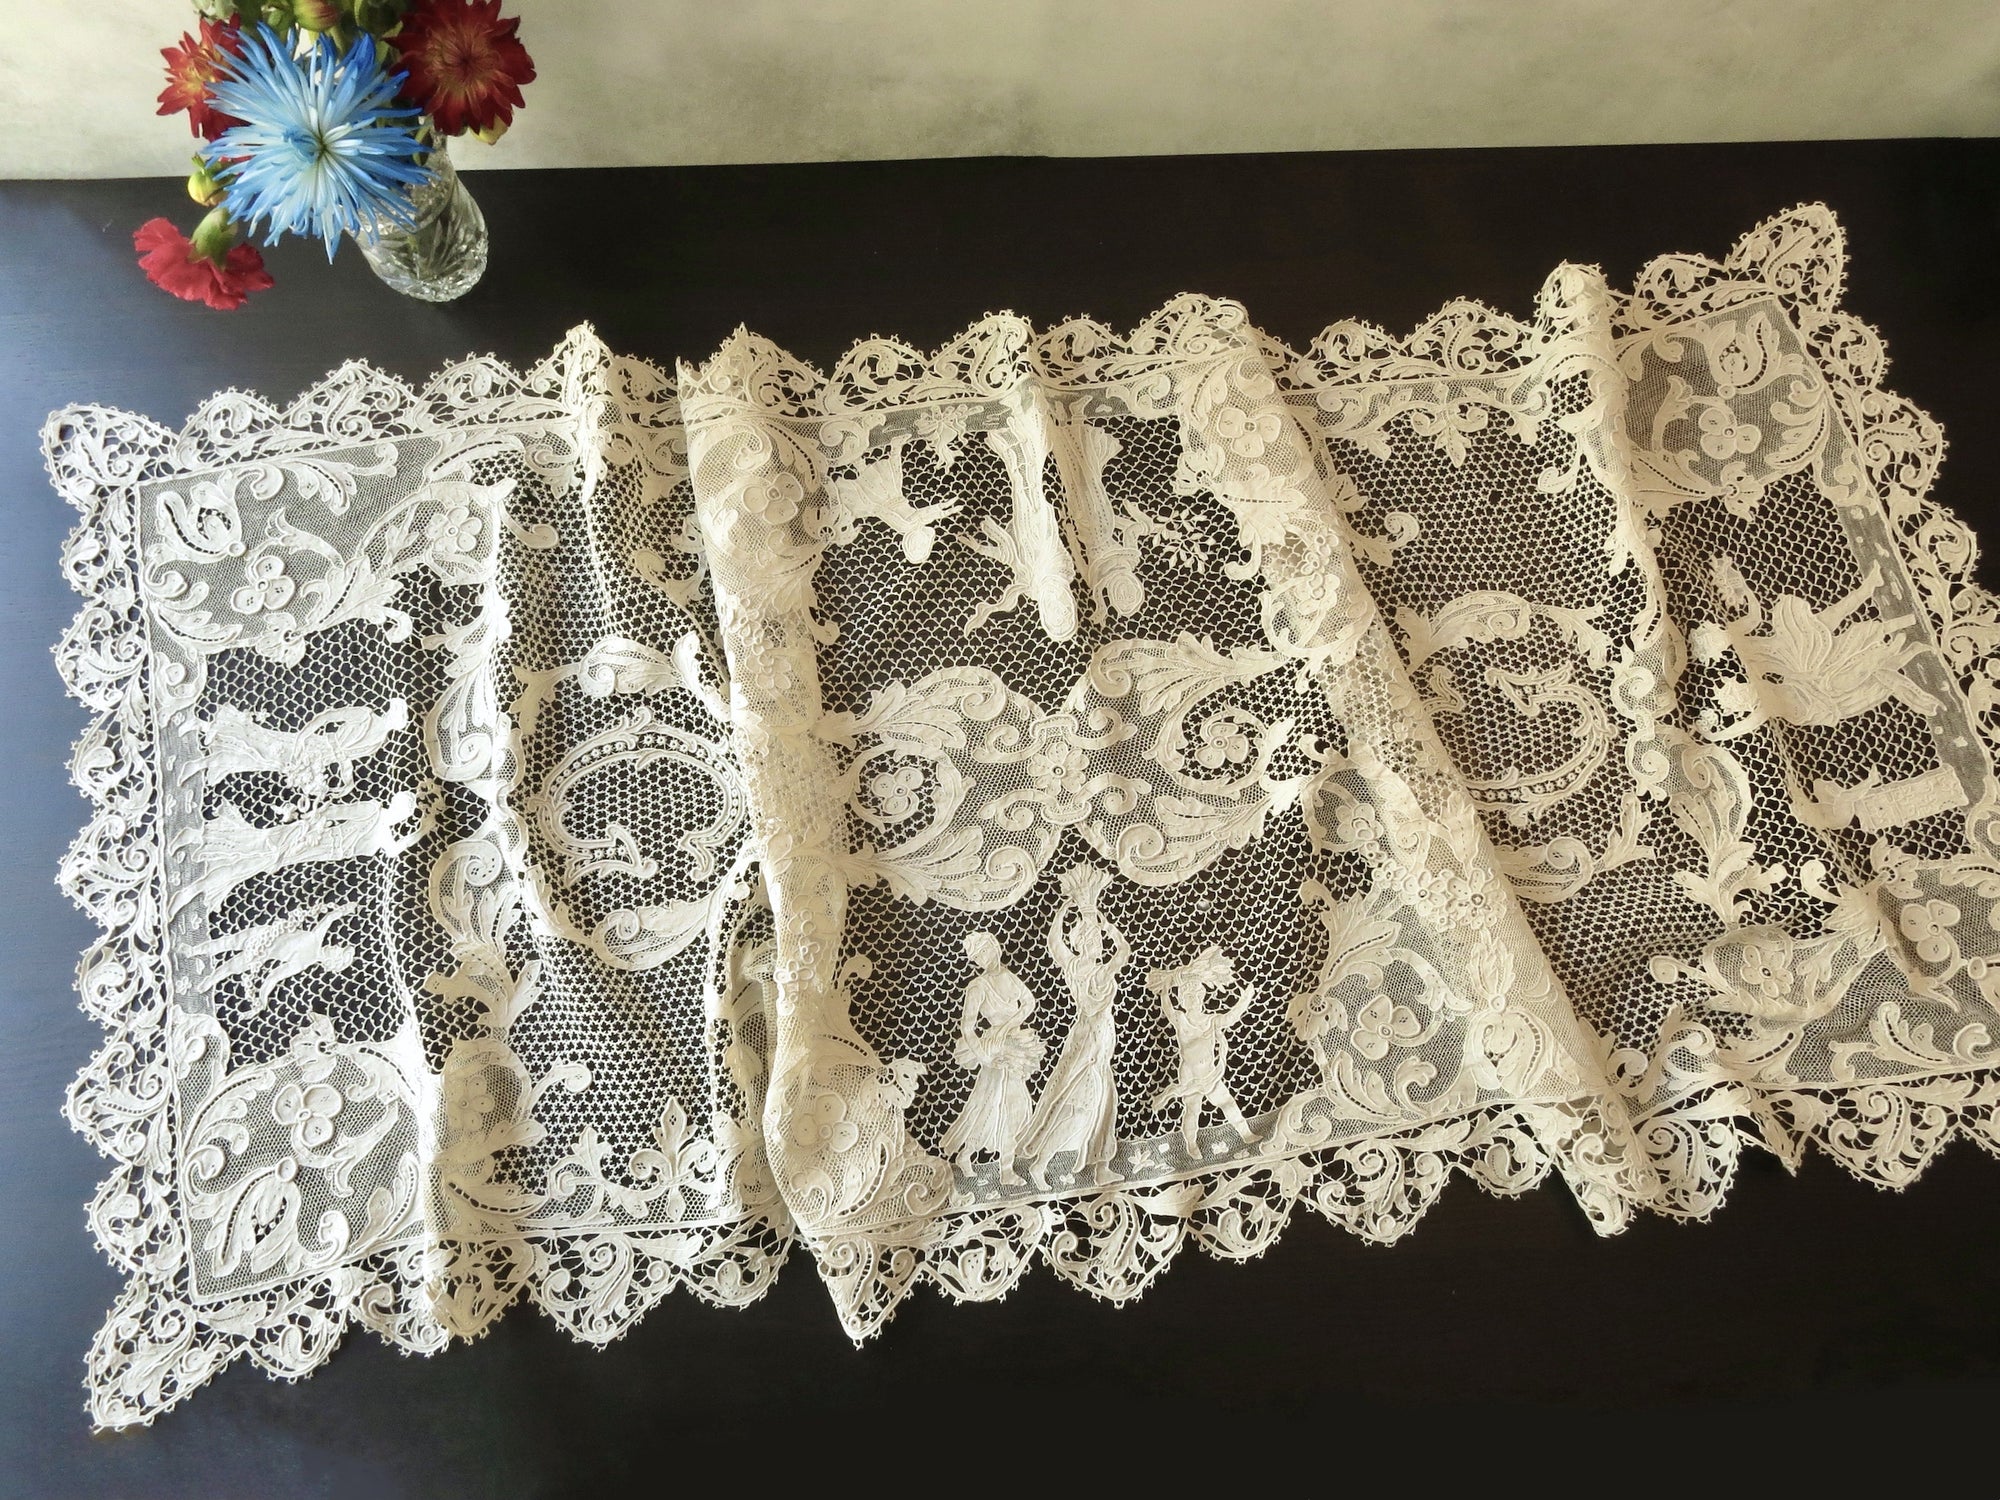 Four Seasons Antique Lace Table Runner 22x58"